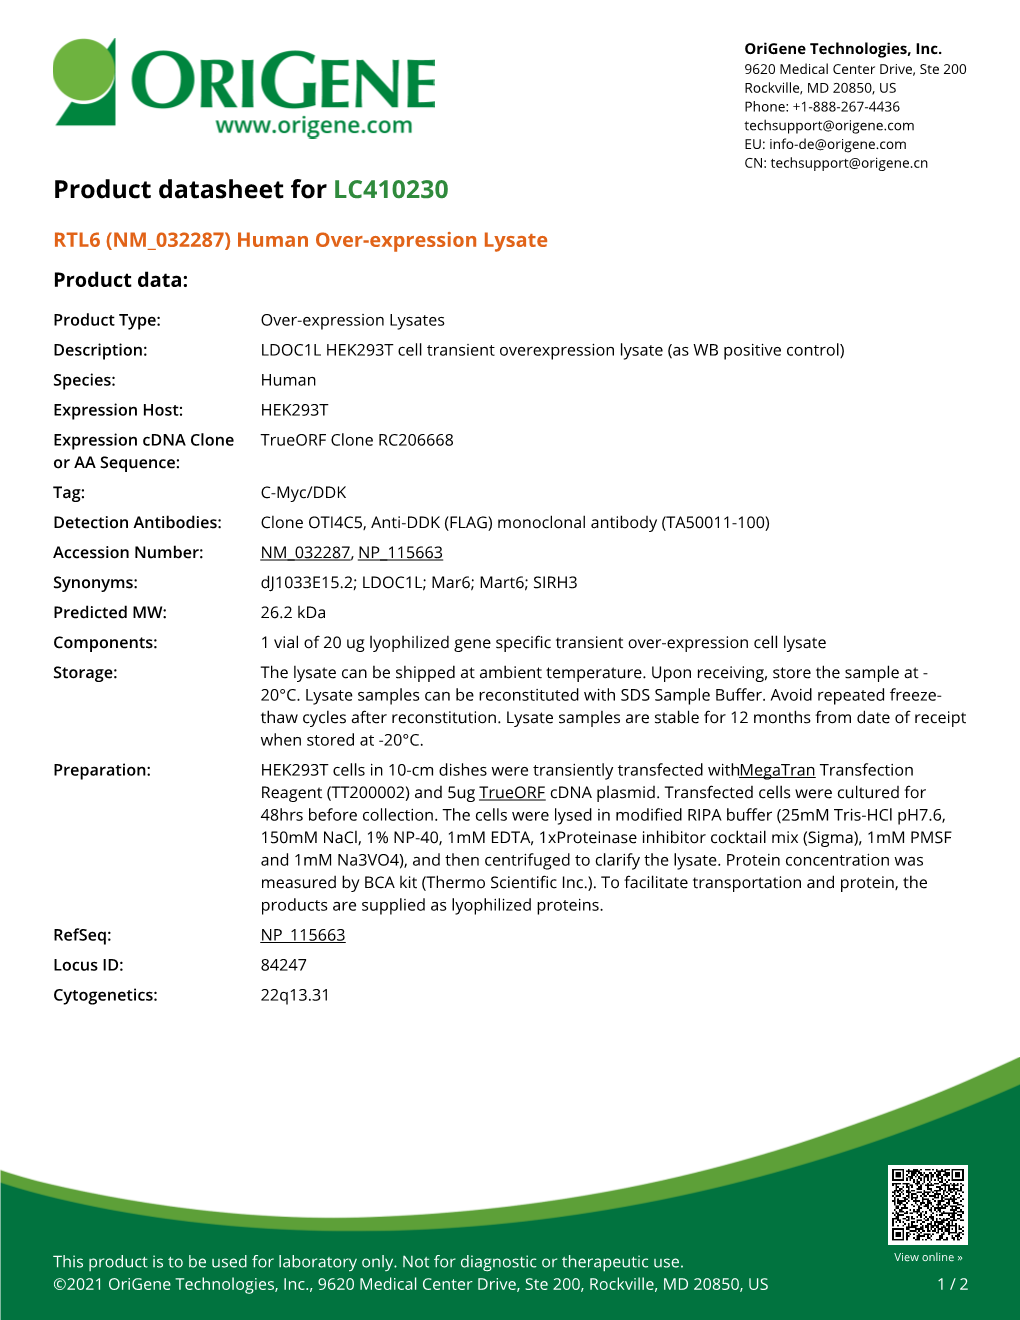 RTL6 (NM 032287) Human Over-Expression Lysate – LC410230 | Origene